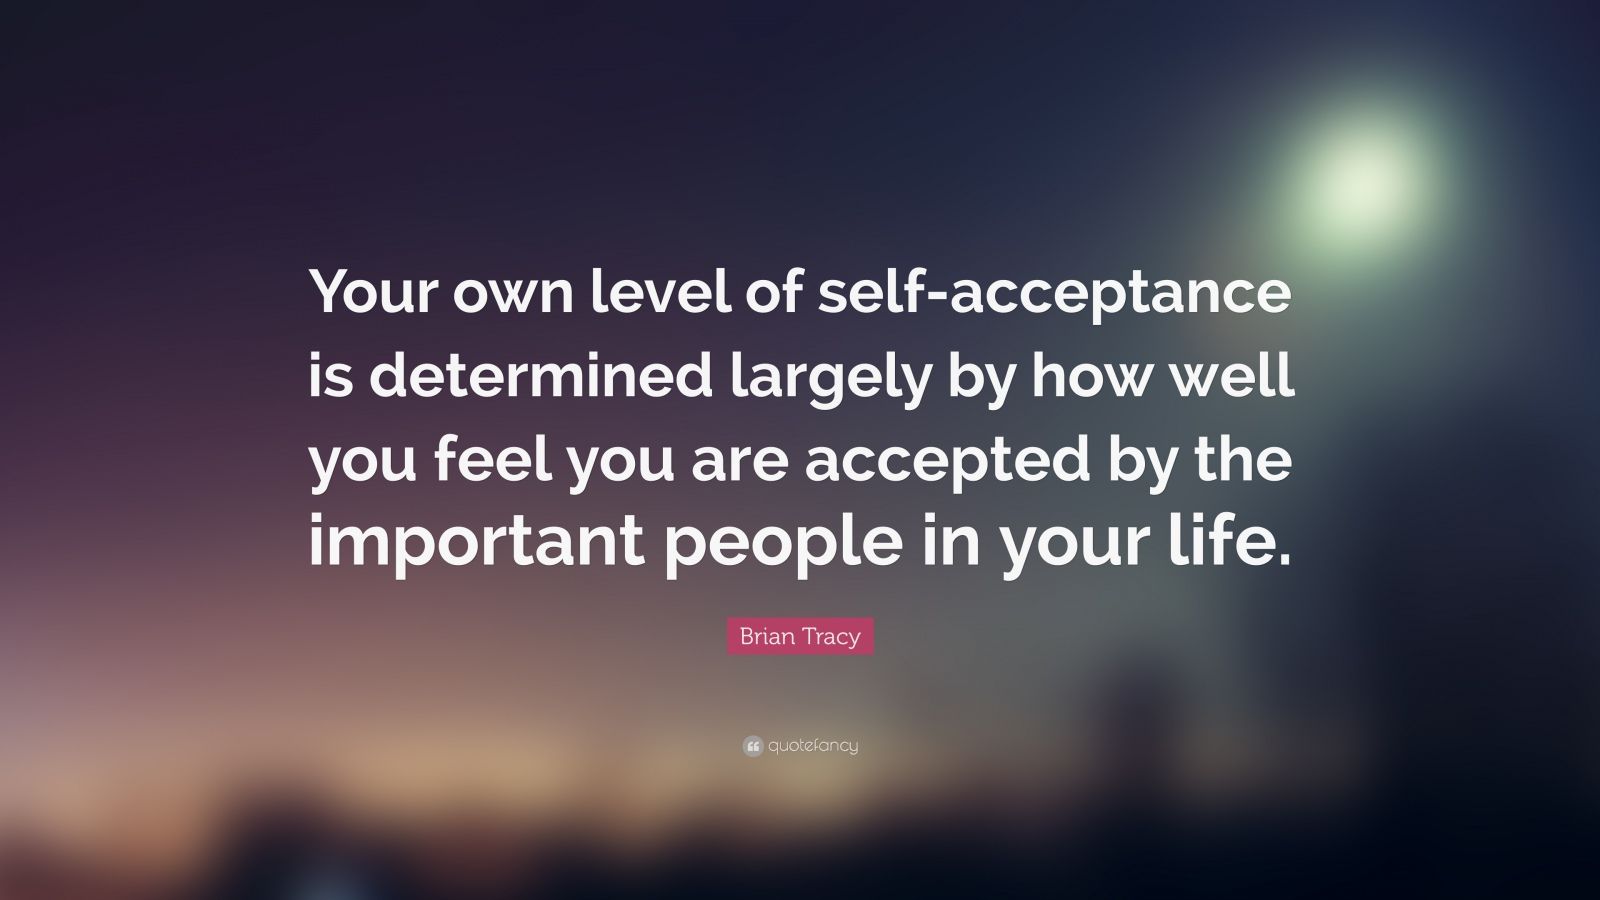 Brian Tracy Quote: “Your own level of self-acceptance is determined ...